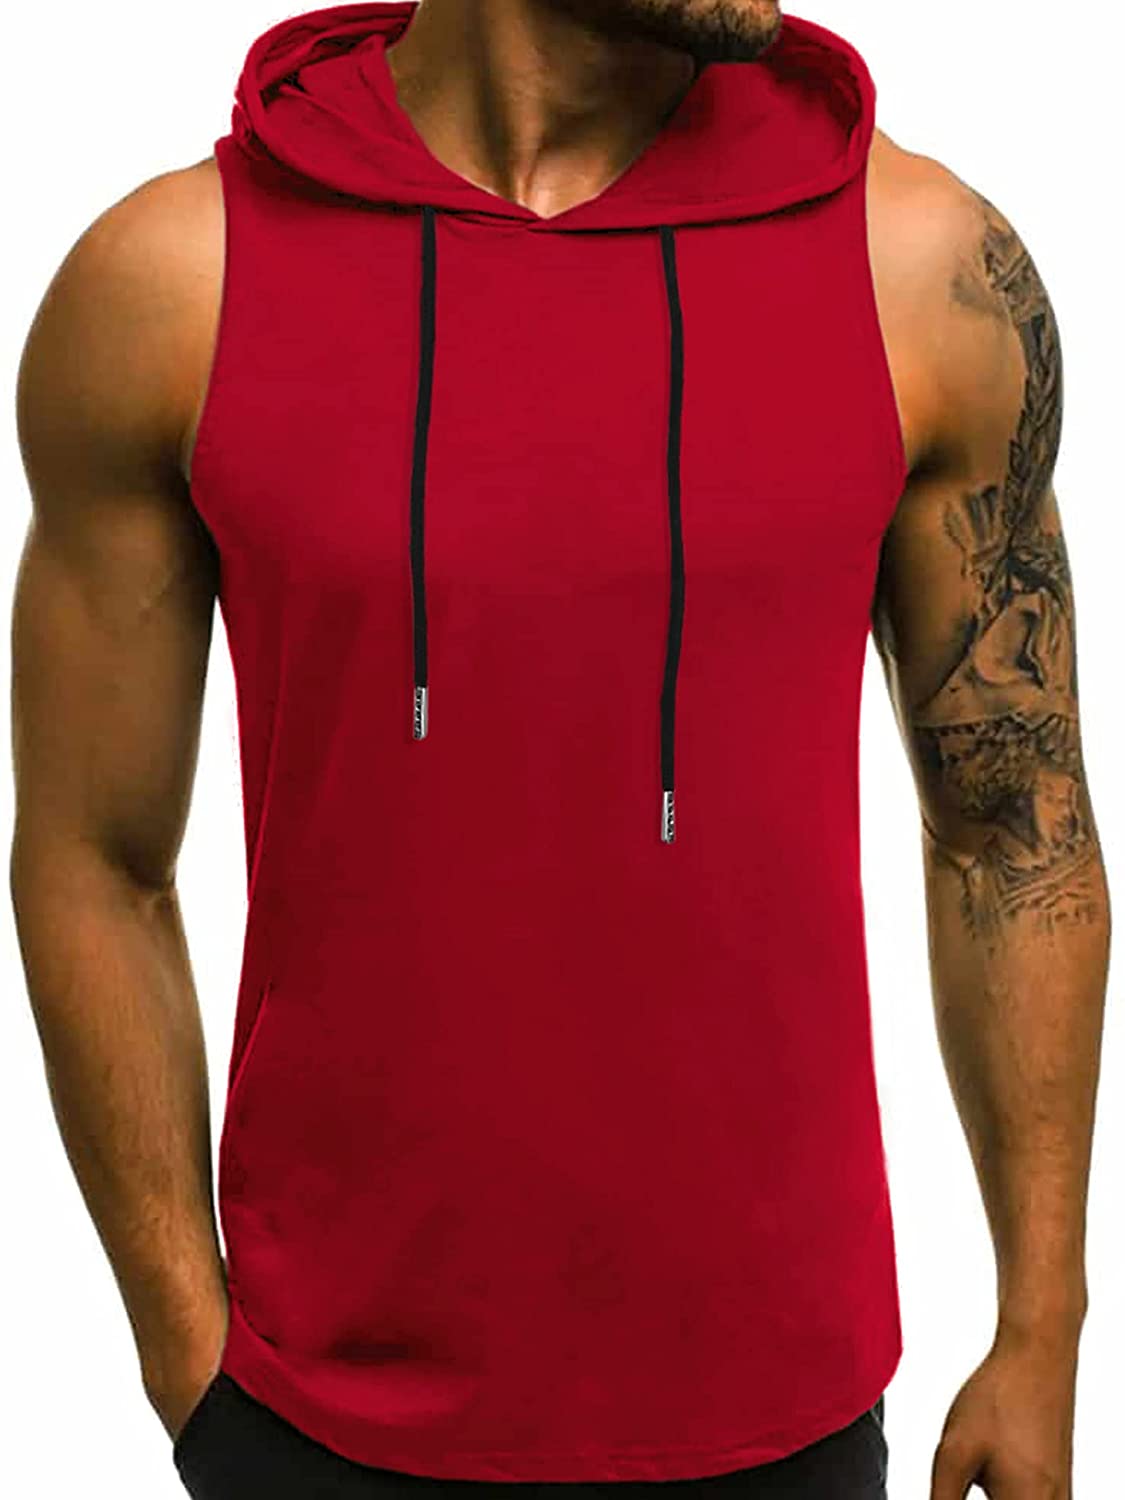 Babioboa Men's Workout Hooded Tank Tops Sleeveless Gym Hoodies Bodybuilding Muscle Shirts